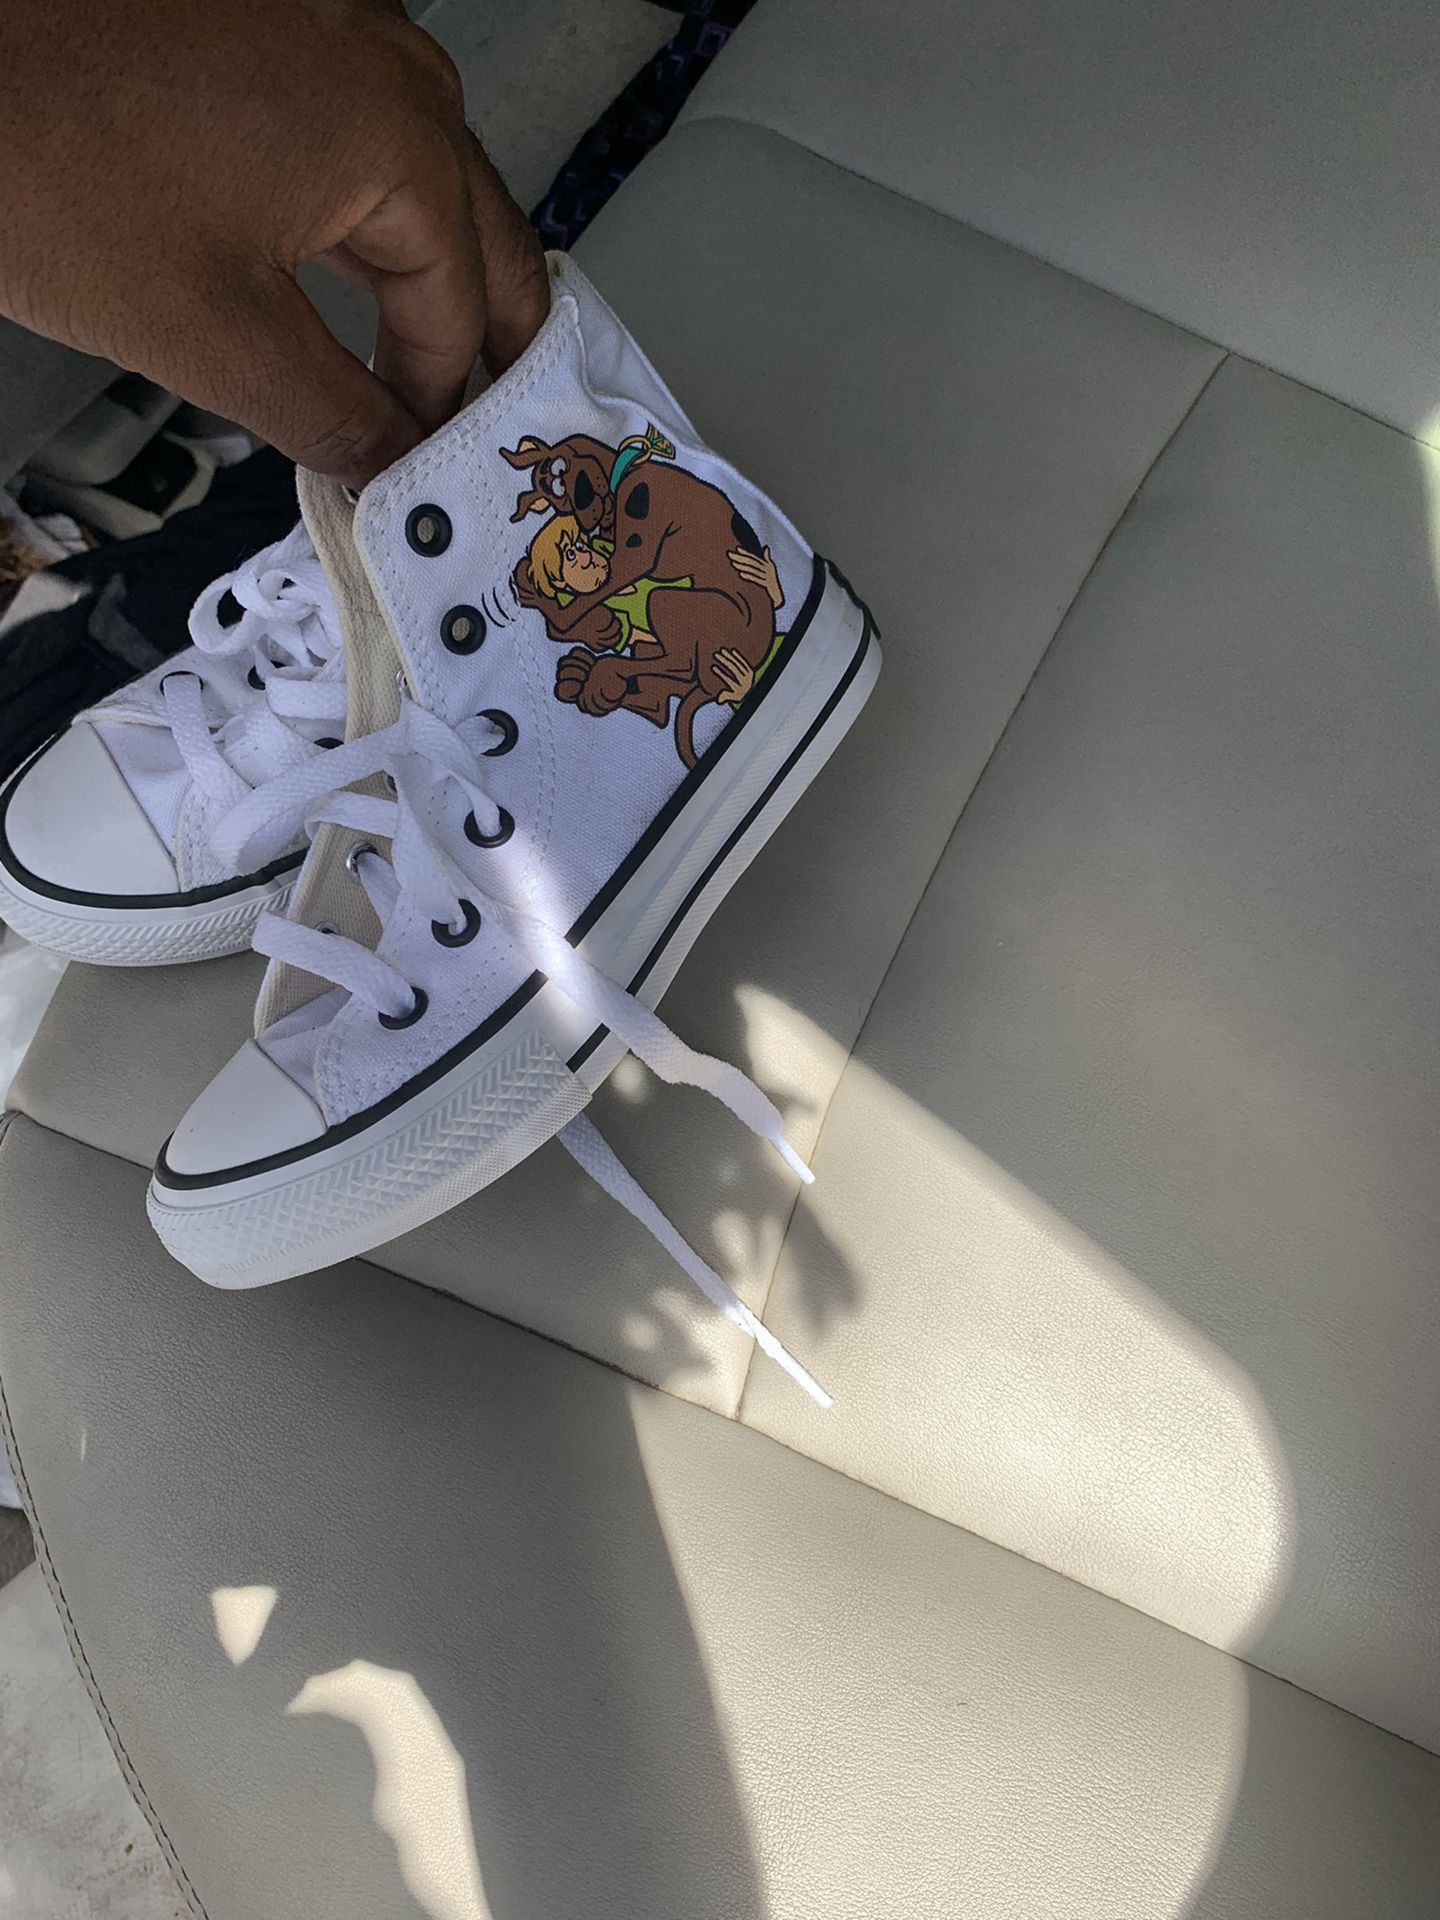 Brand Kids 11c  New Scooby Doo Converse Paid 118 off goat Only Want 55 Serious Inquires Only